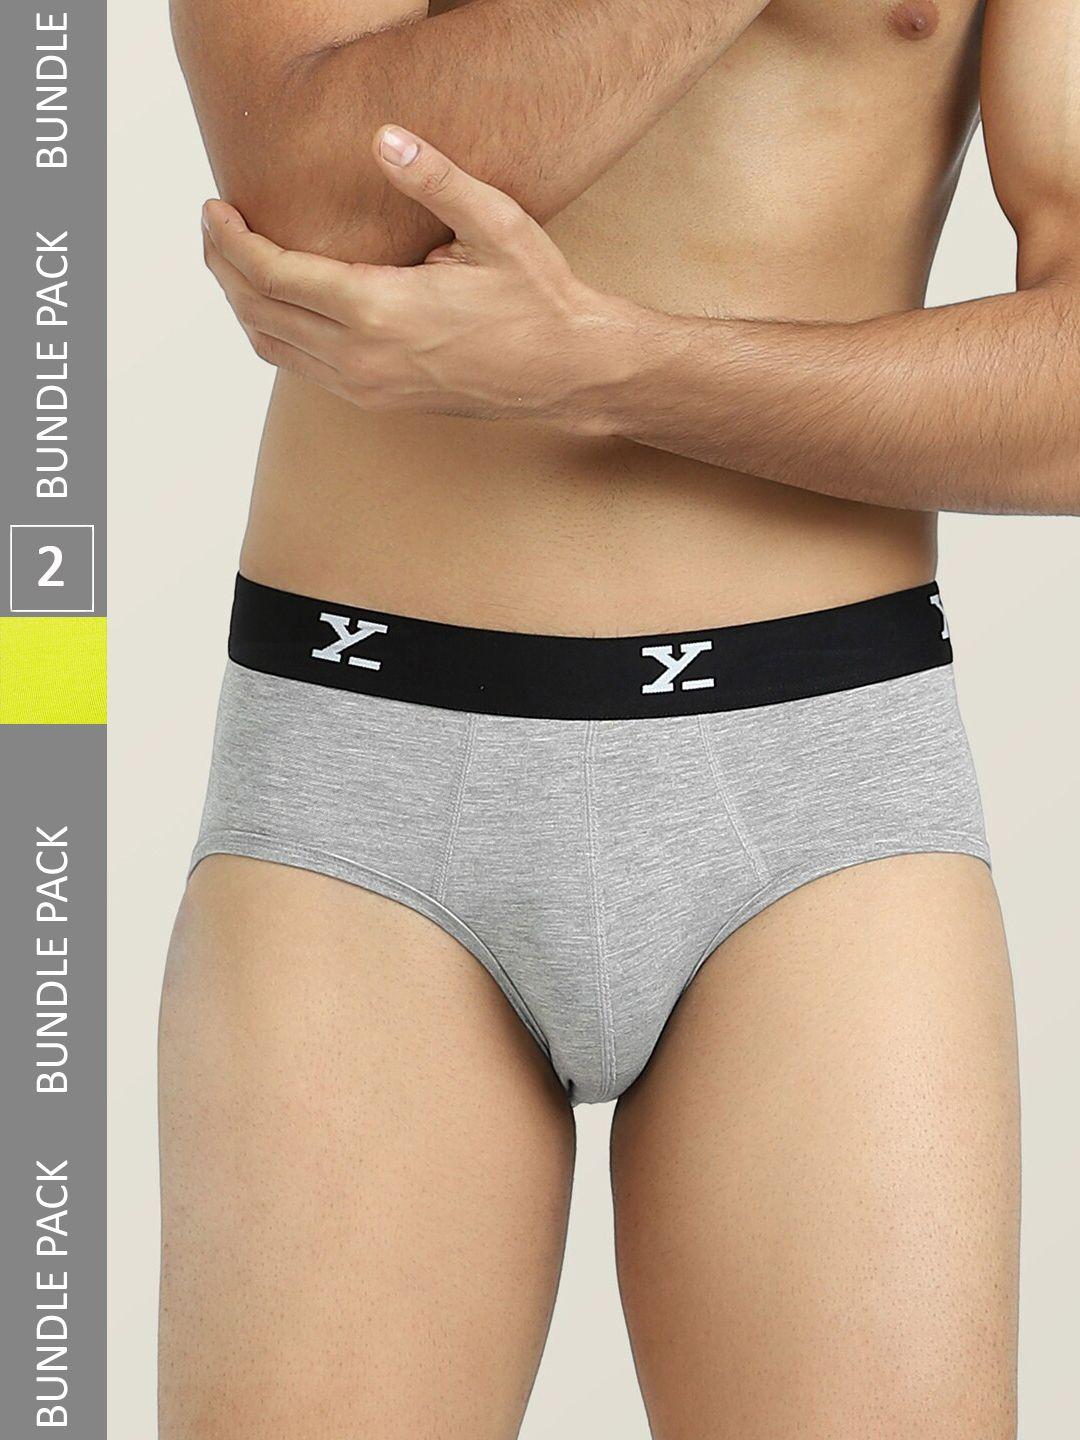 xyxx men pack of 2 intellisoft antimicrobial micro modal dualist briefs xybrf2pckn602